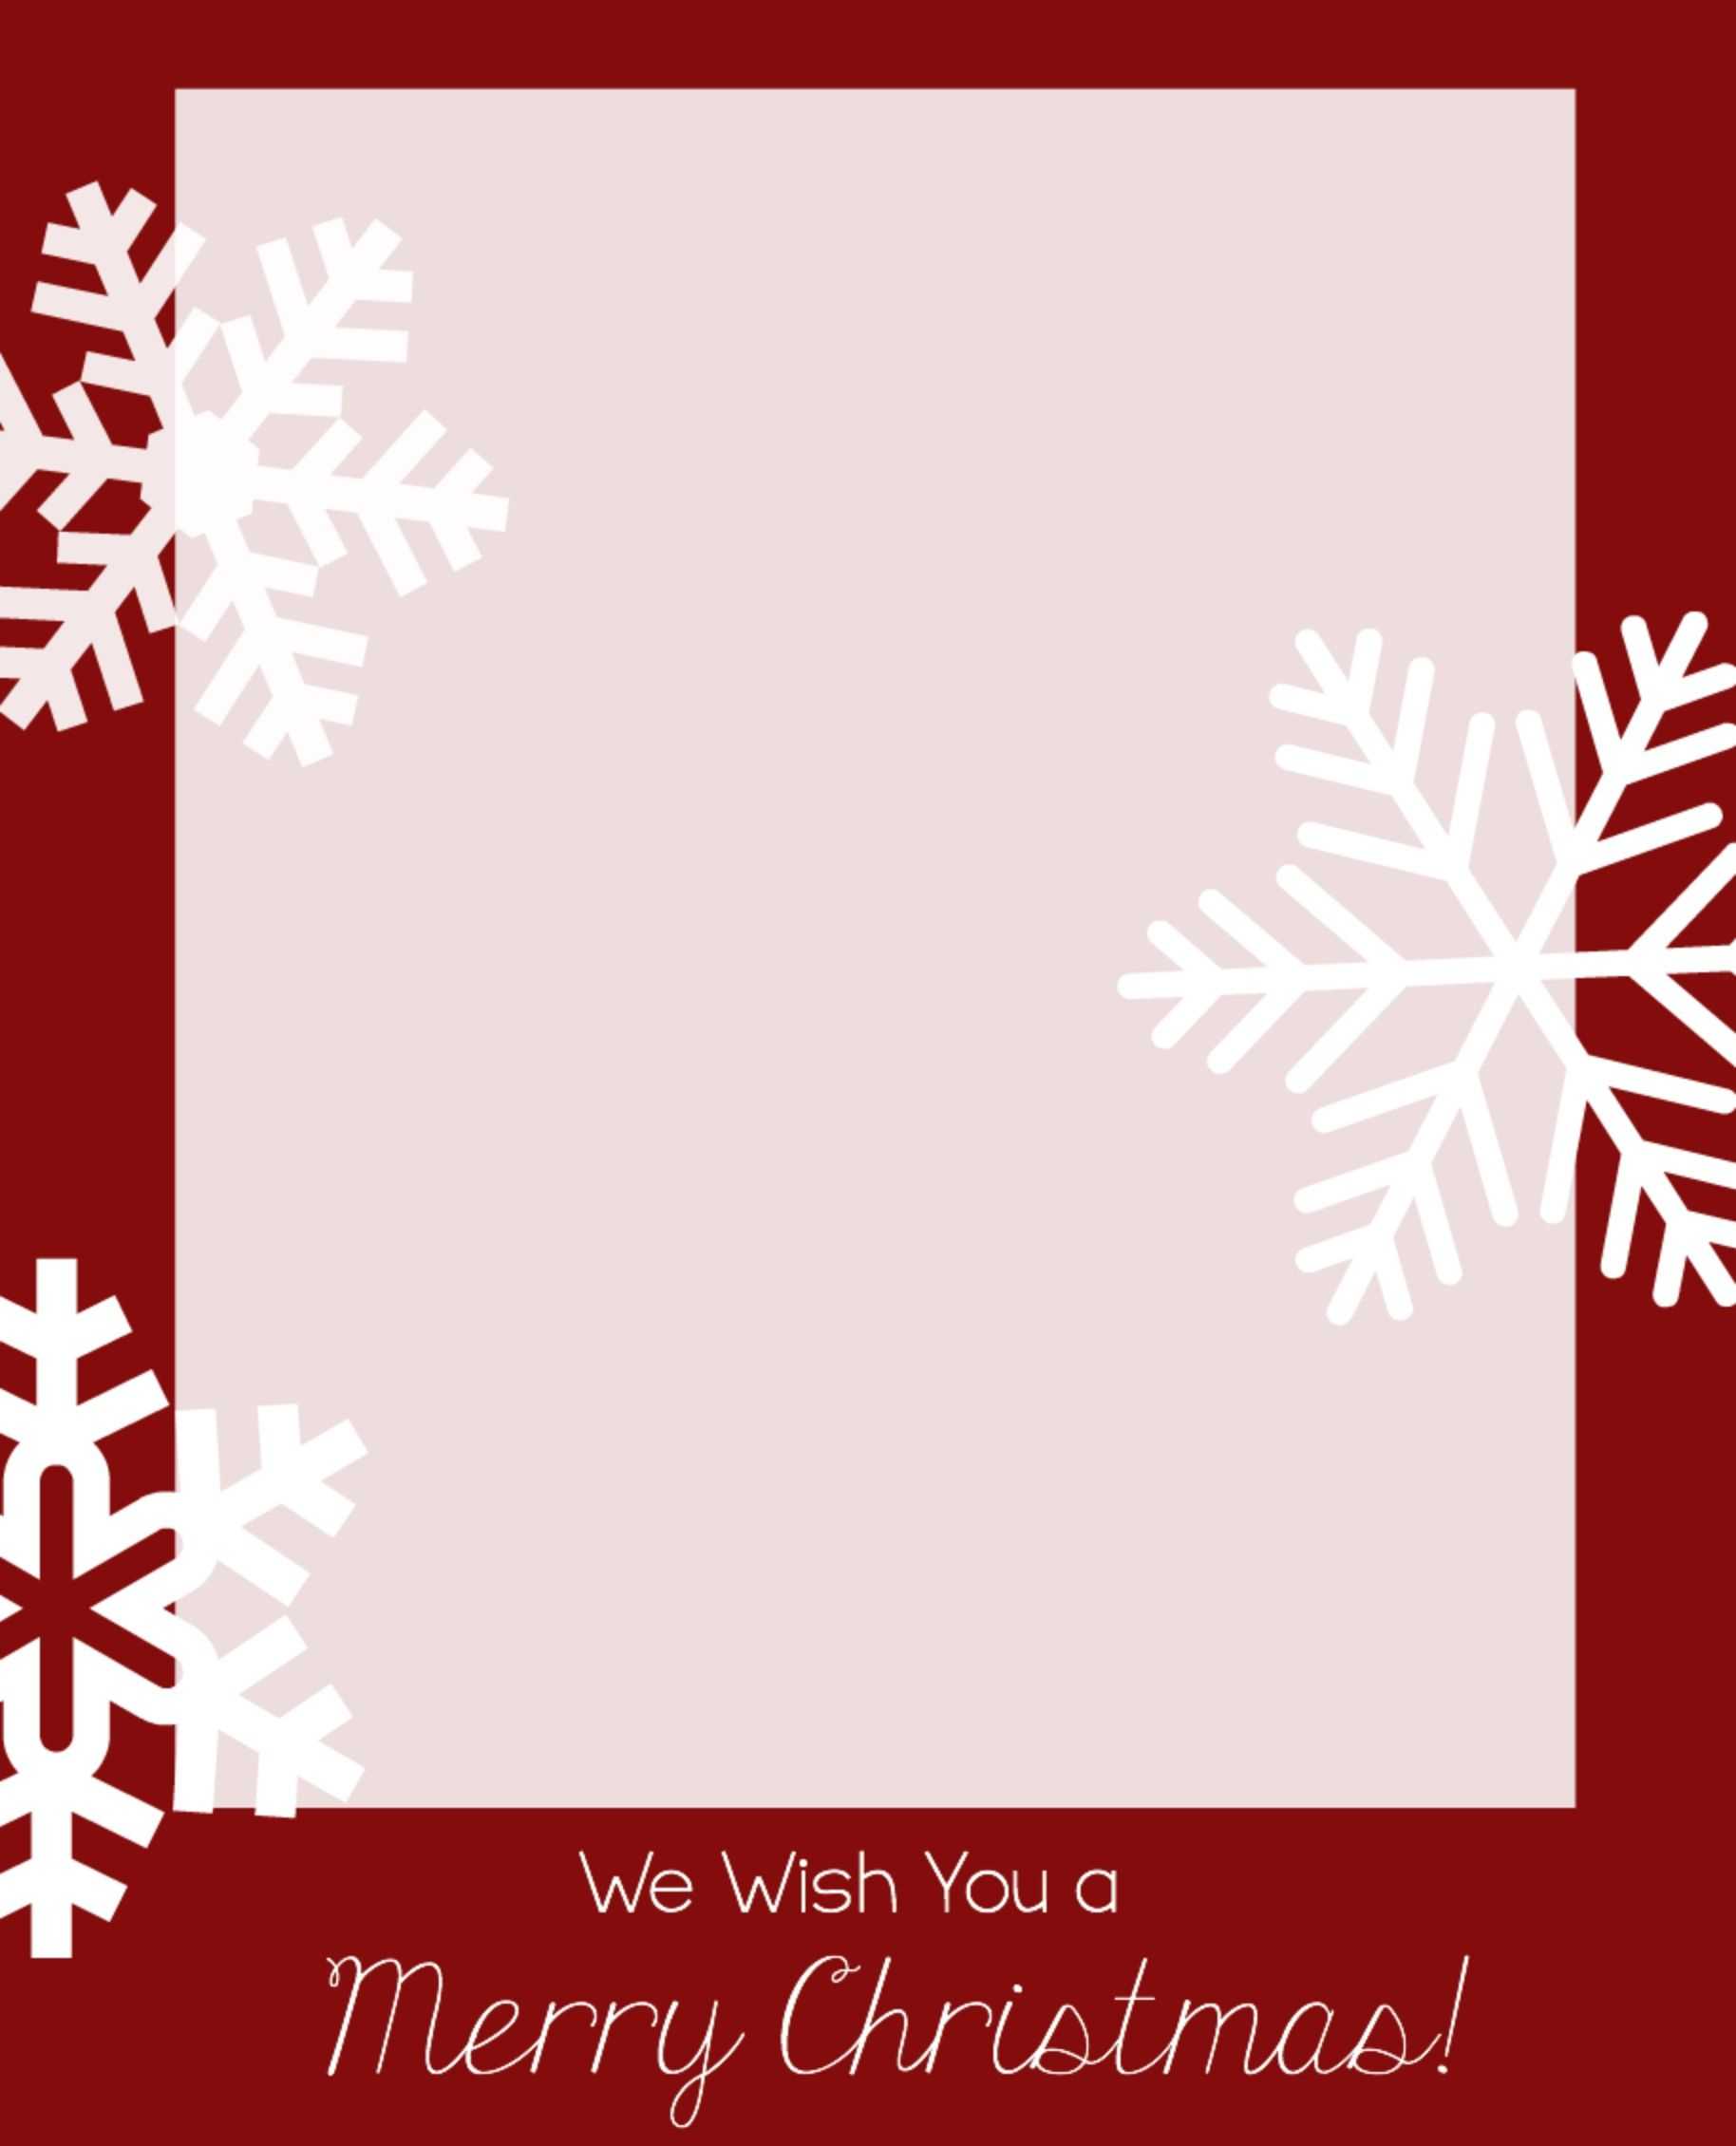 Free Christmas Card Templates | Christmas Is In The Air Inside Printable Holiday Card Templates